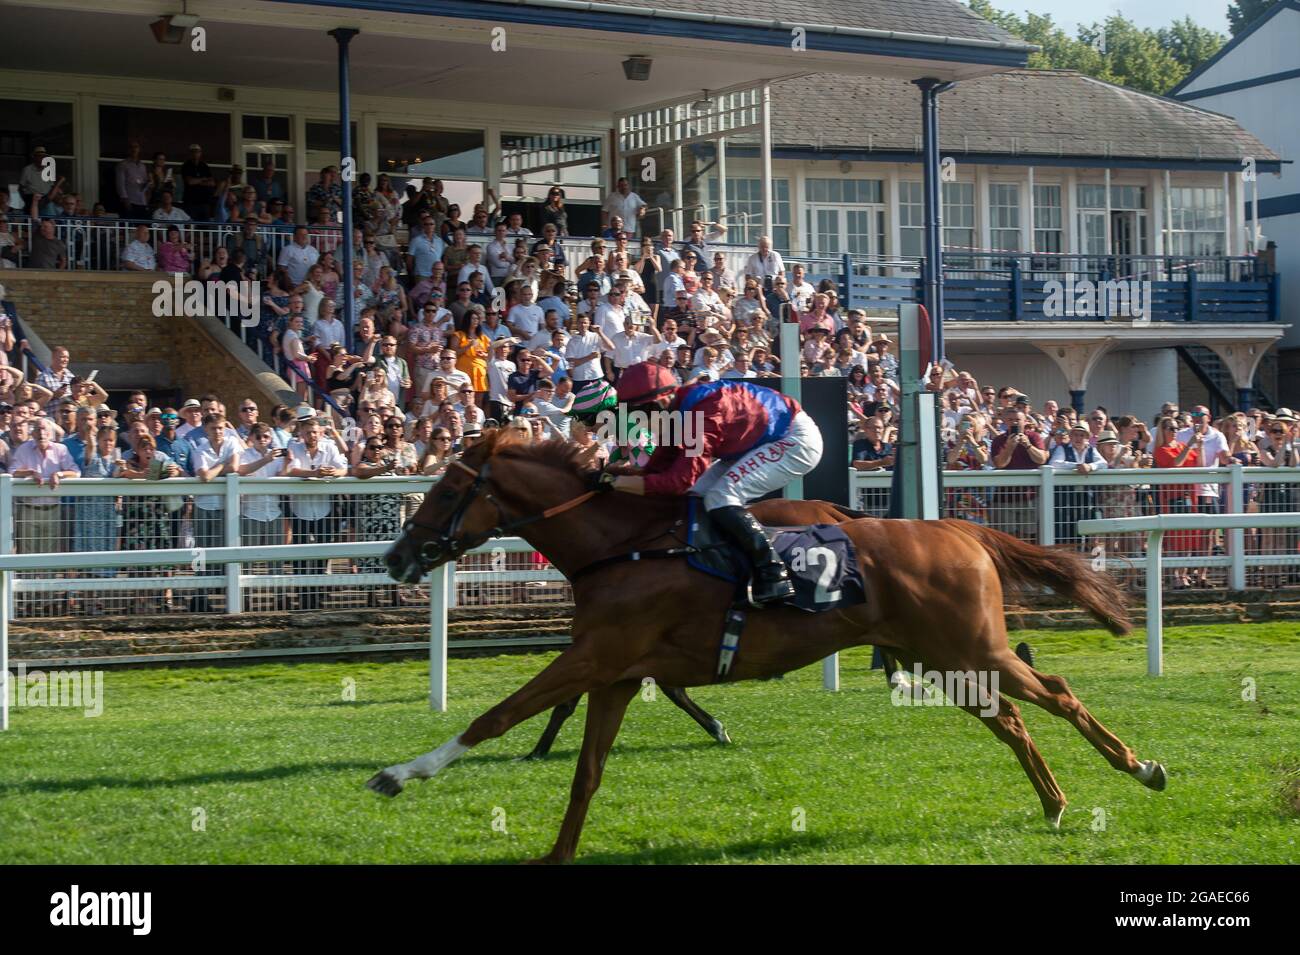 Windsor, Berkshire, UK. 19th July, 2021. Jockey Tom Marquand (R) wins the  Free Tips Daily on Attheraces.com Handicap Stakes on horse Diamond Bay  trained by Tom Ward, Upper Lambourn. Credit: Maureen McLean/Alamy